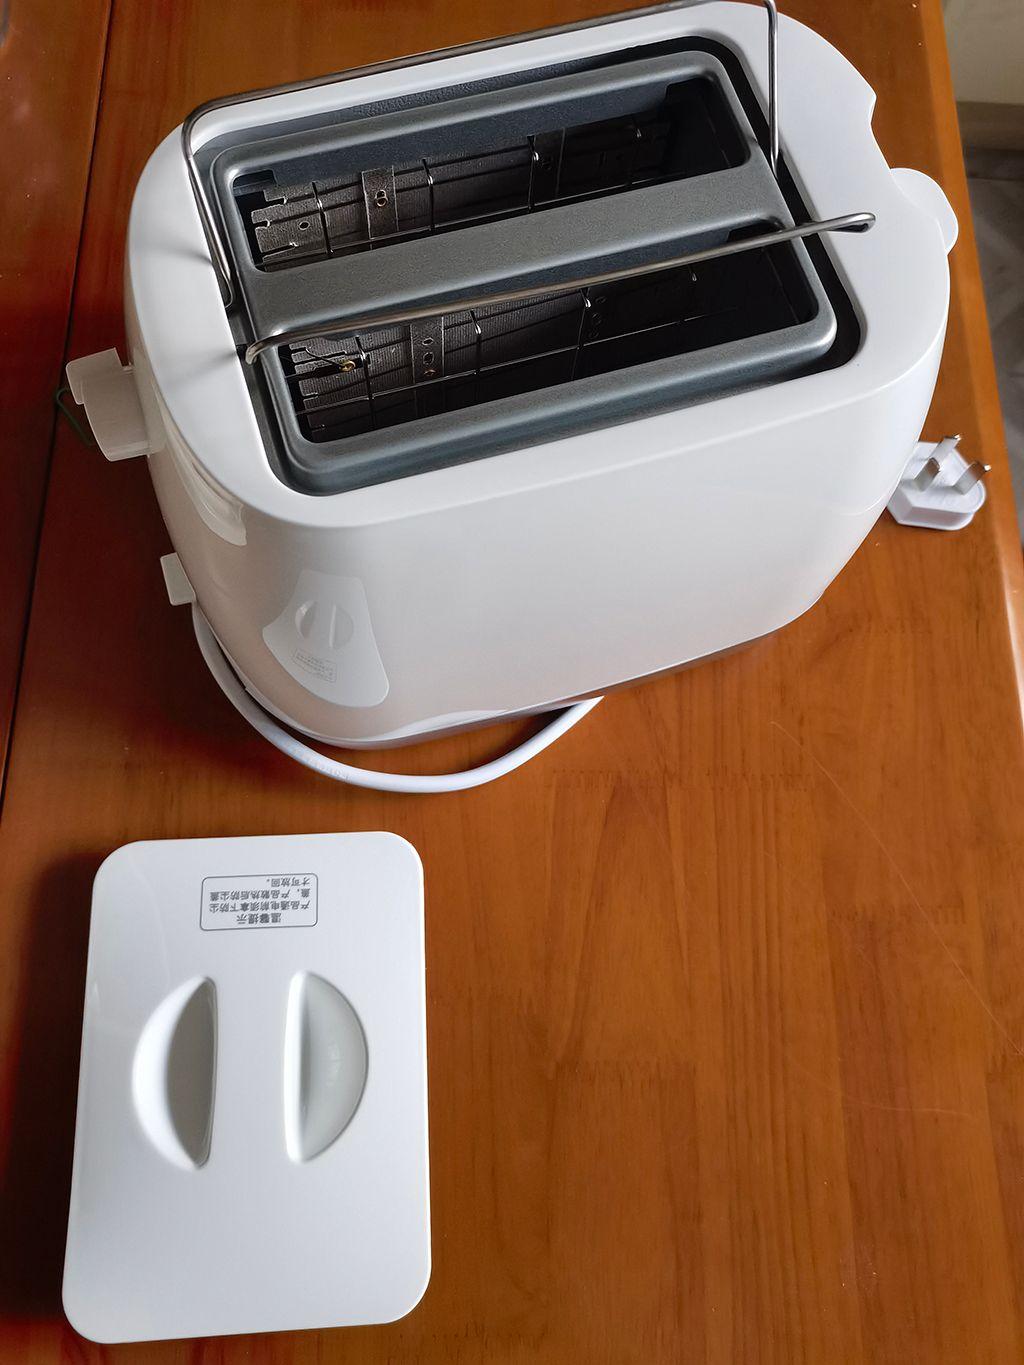 2-Slice Long Slot Toaster with Window, CUKOR Bagel Toaster with Warm Rack  and 7 Bread Shade Settings - CUKOR